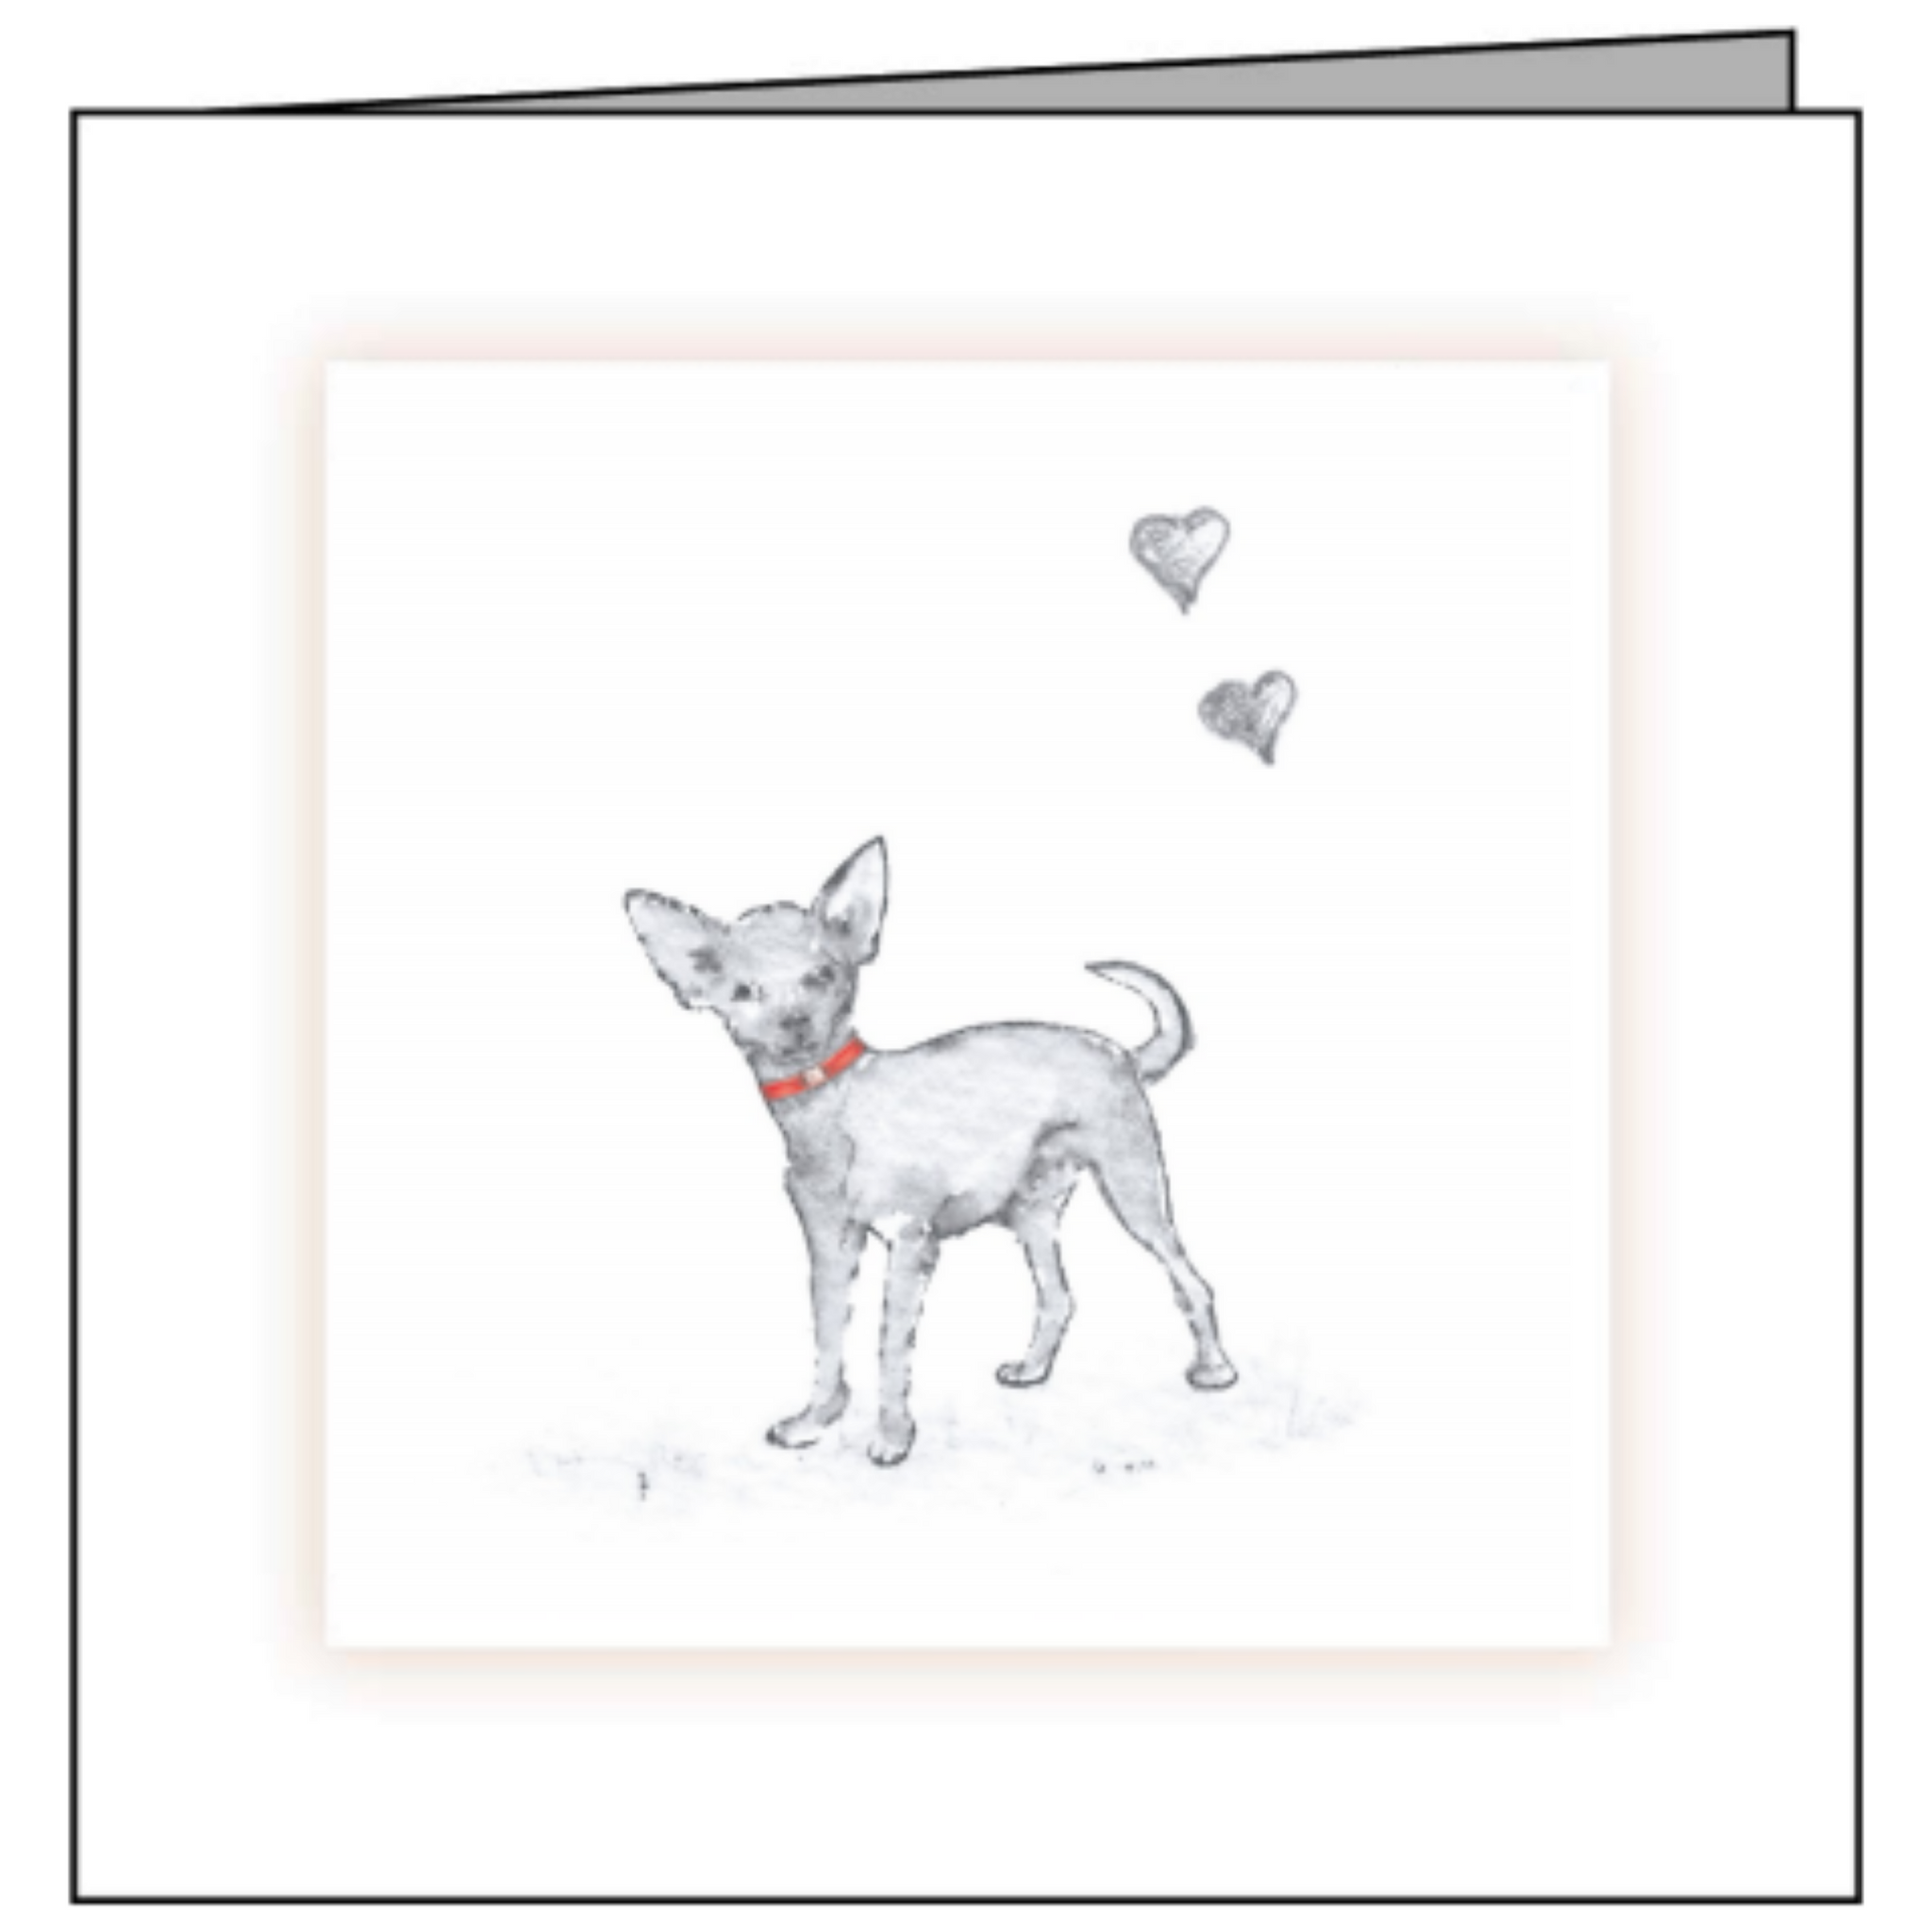 Animal Hospital Sympathy Card - Small Dog with Red Collar